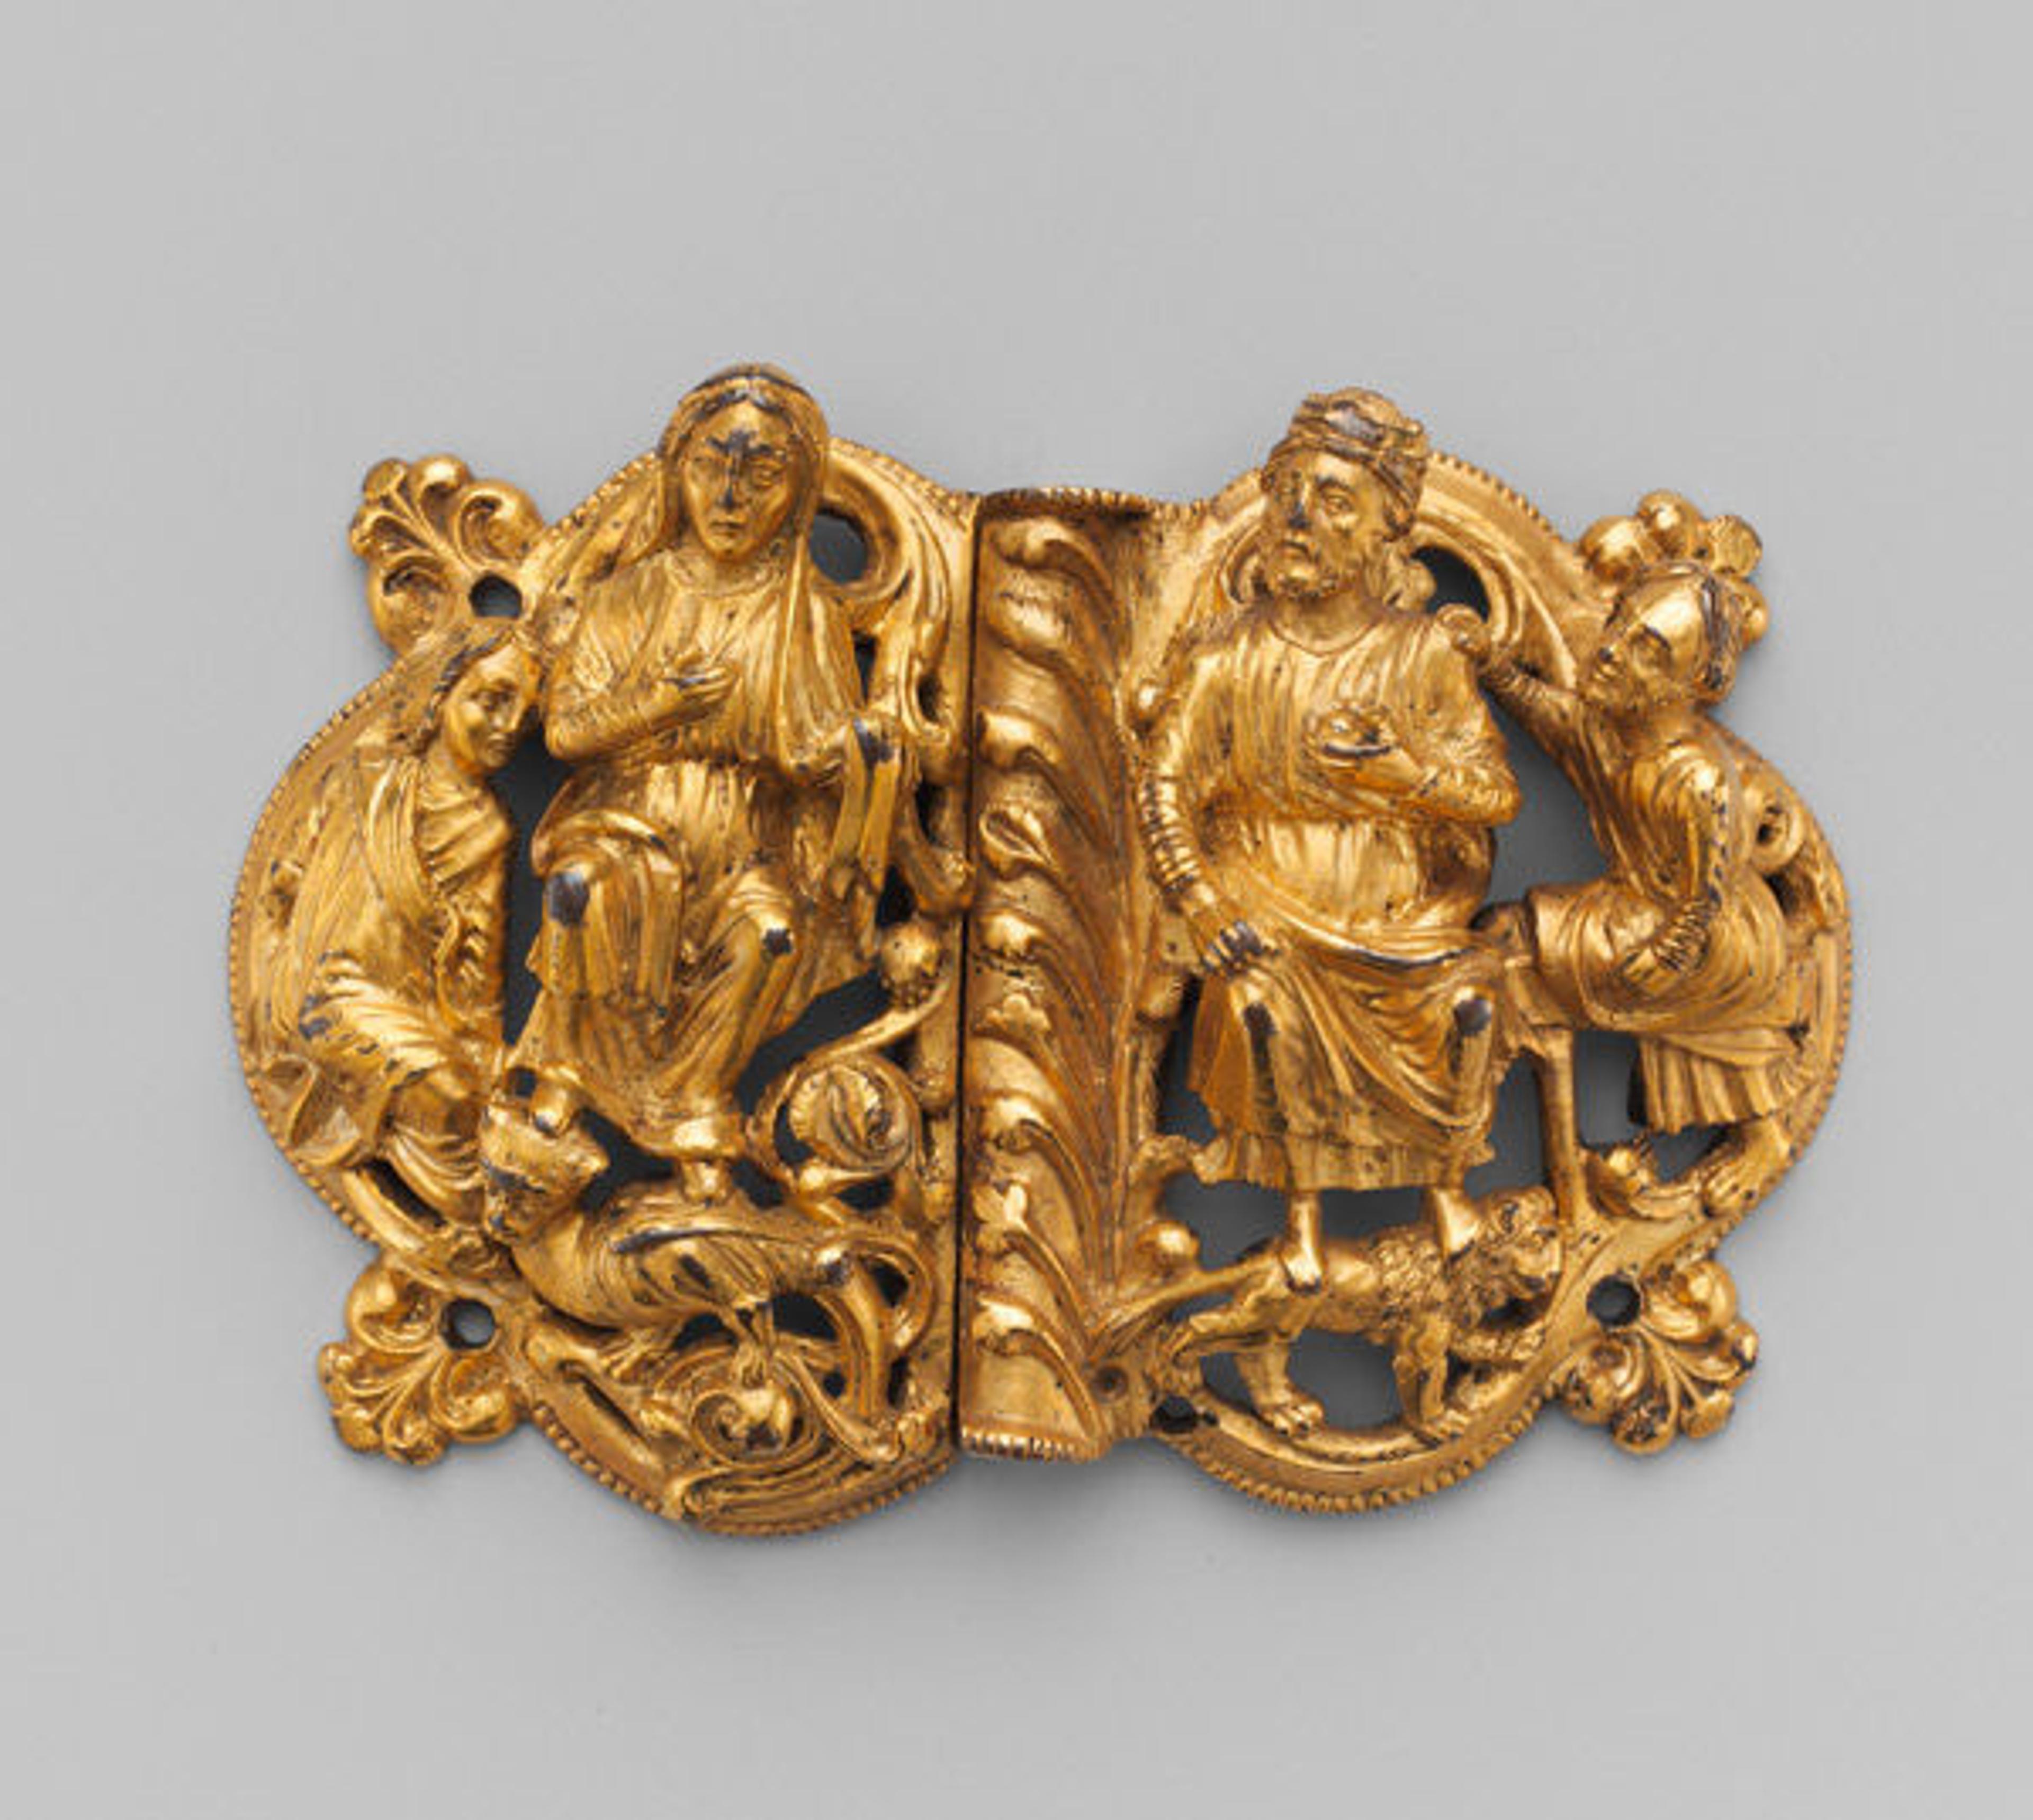 Clasp, ca 1200. Made in Meuse Valley, South Netherlands. Copper alloy, gilding; Overall: 2 1/8 x 2 7/8 x 5/8 in. (5.4 x 7.3 x 1.6 cm). The Metropolitan Museum of Art, New York, The Cloisters Collection, 1947 (47.101.48a, b) /collection/the-collection-online/search/471284 